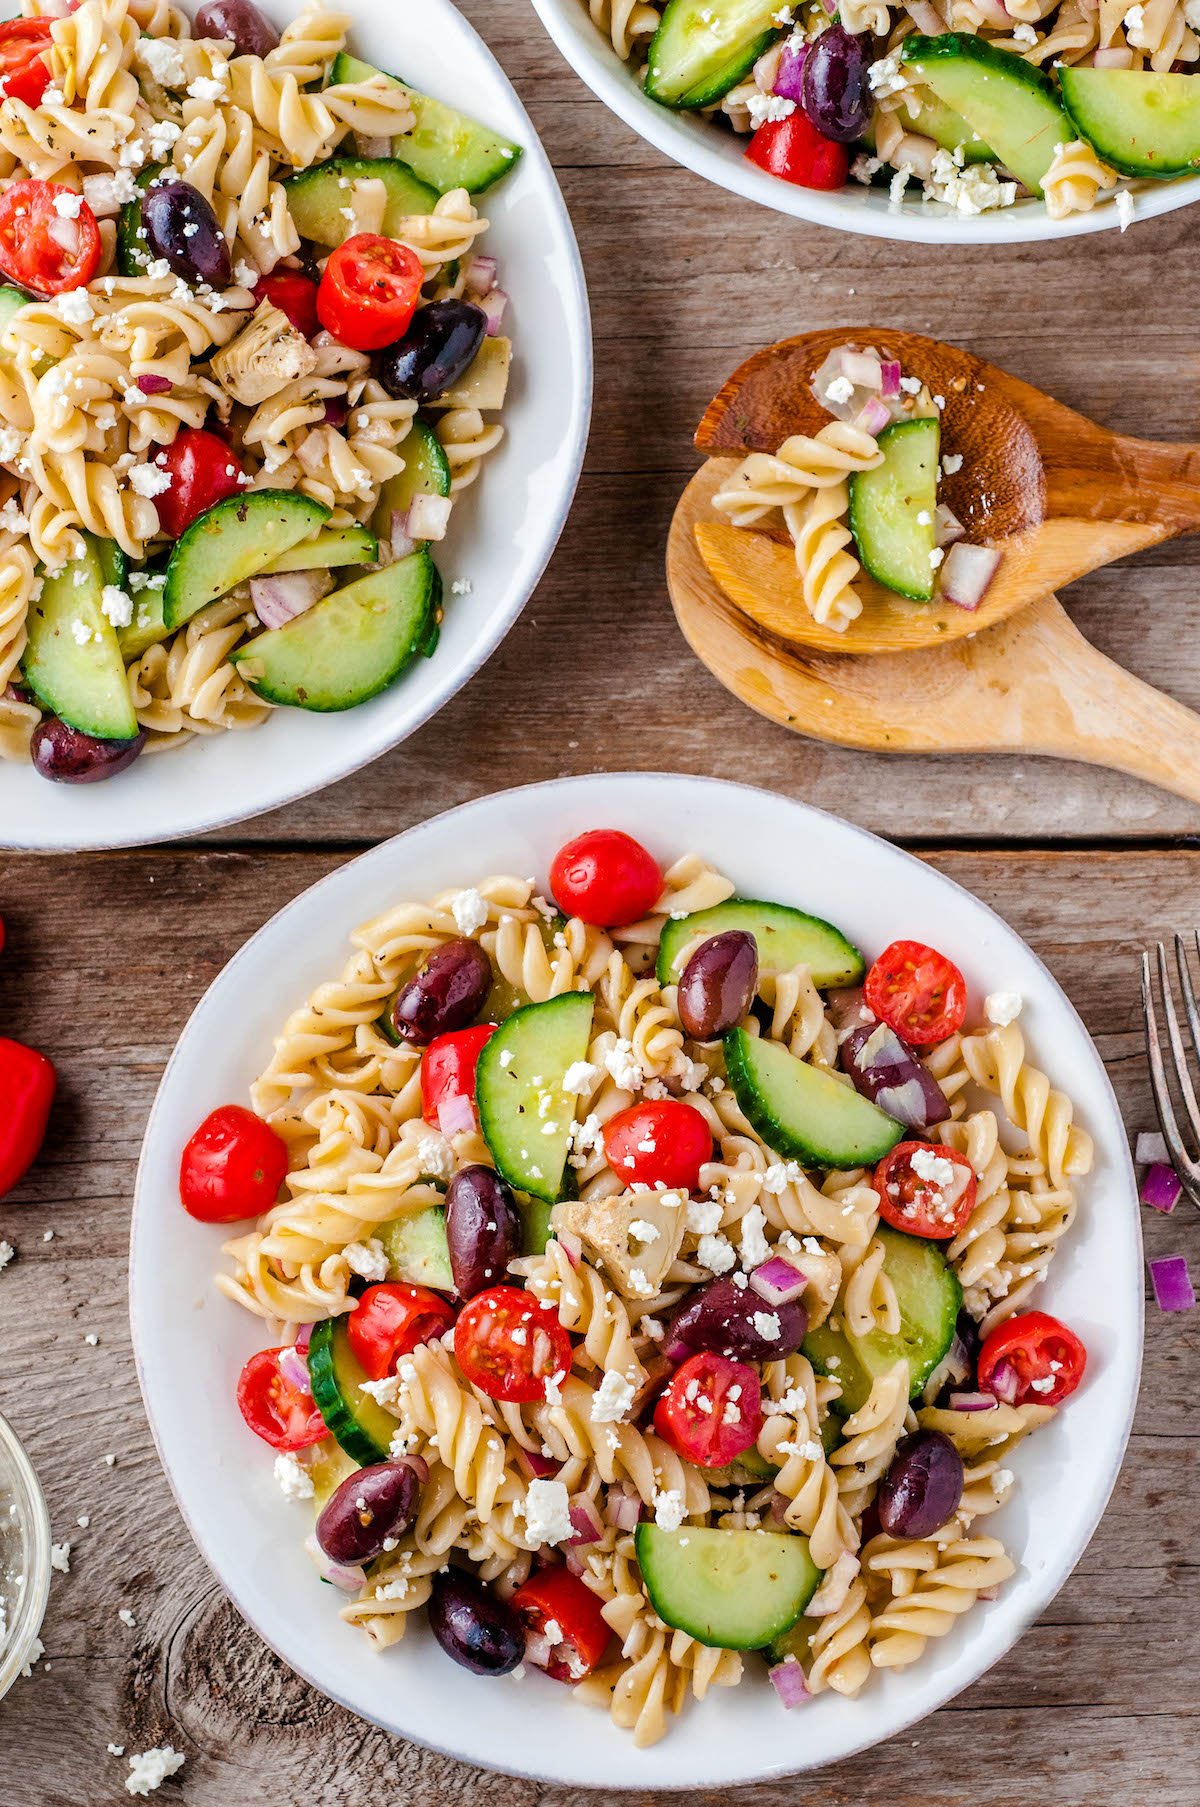 Overhead image of two bowls of pasta salad with two wooden spoons.